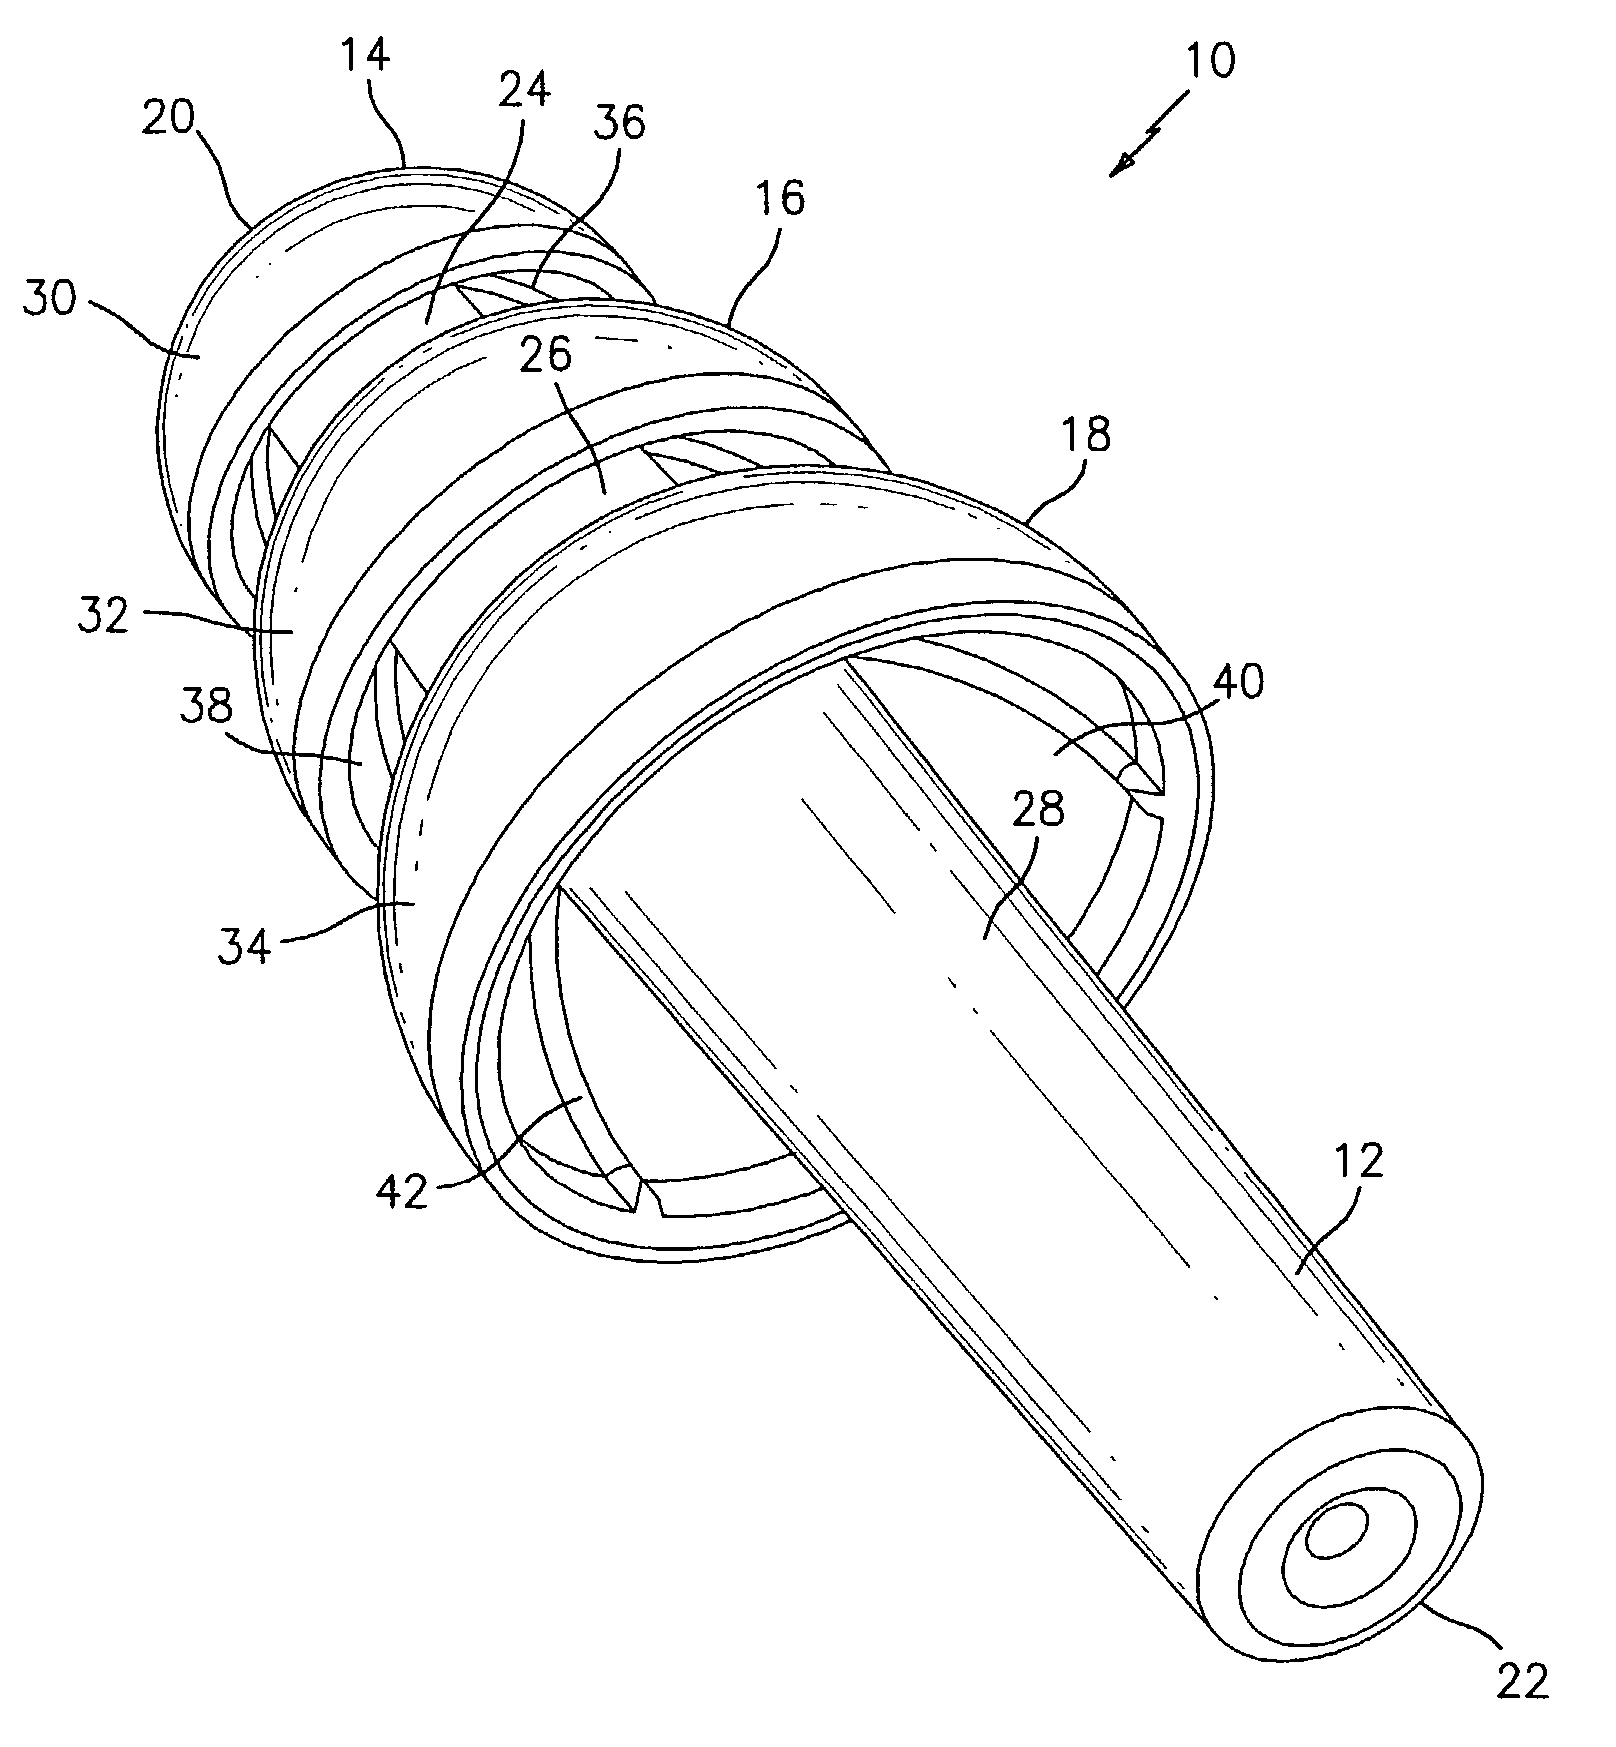 Hearing protection device